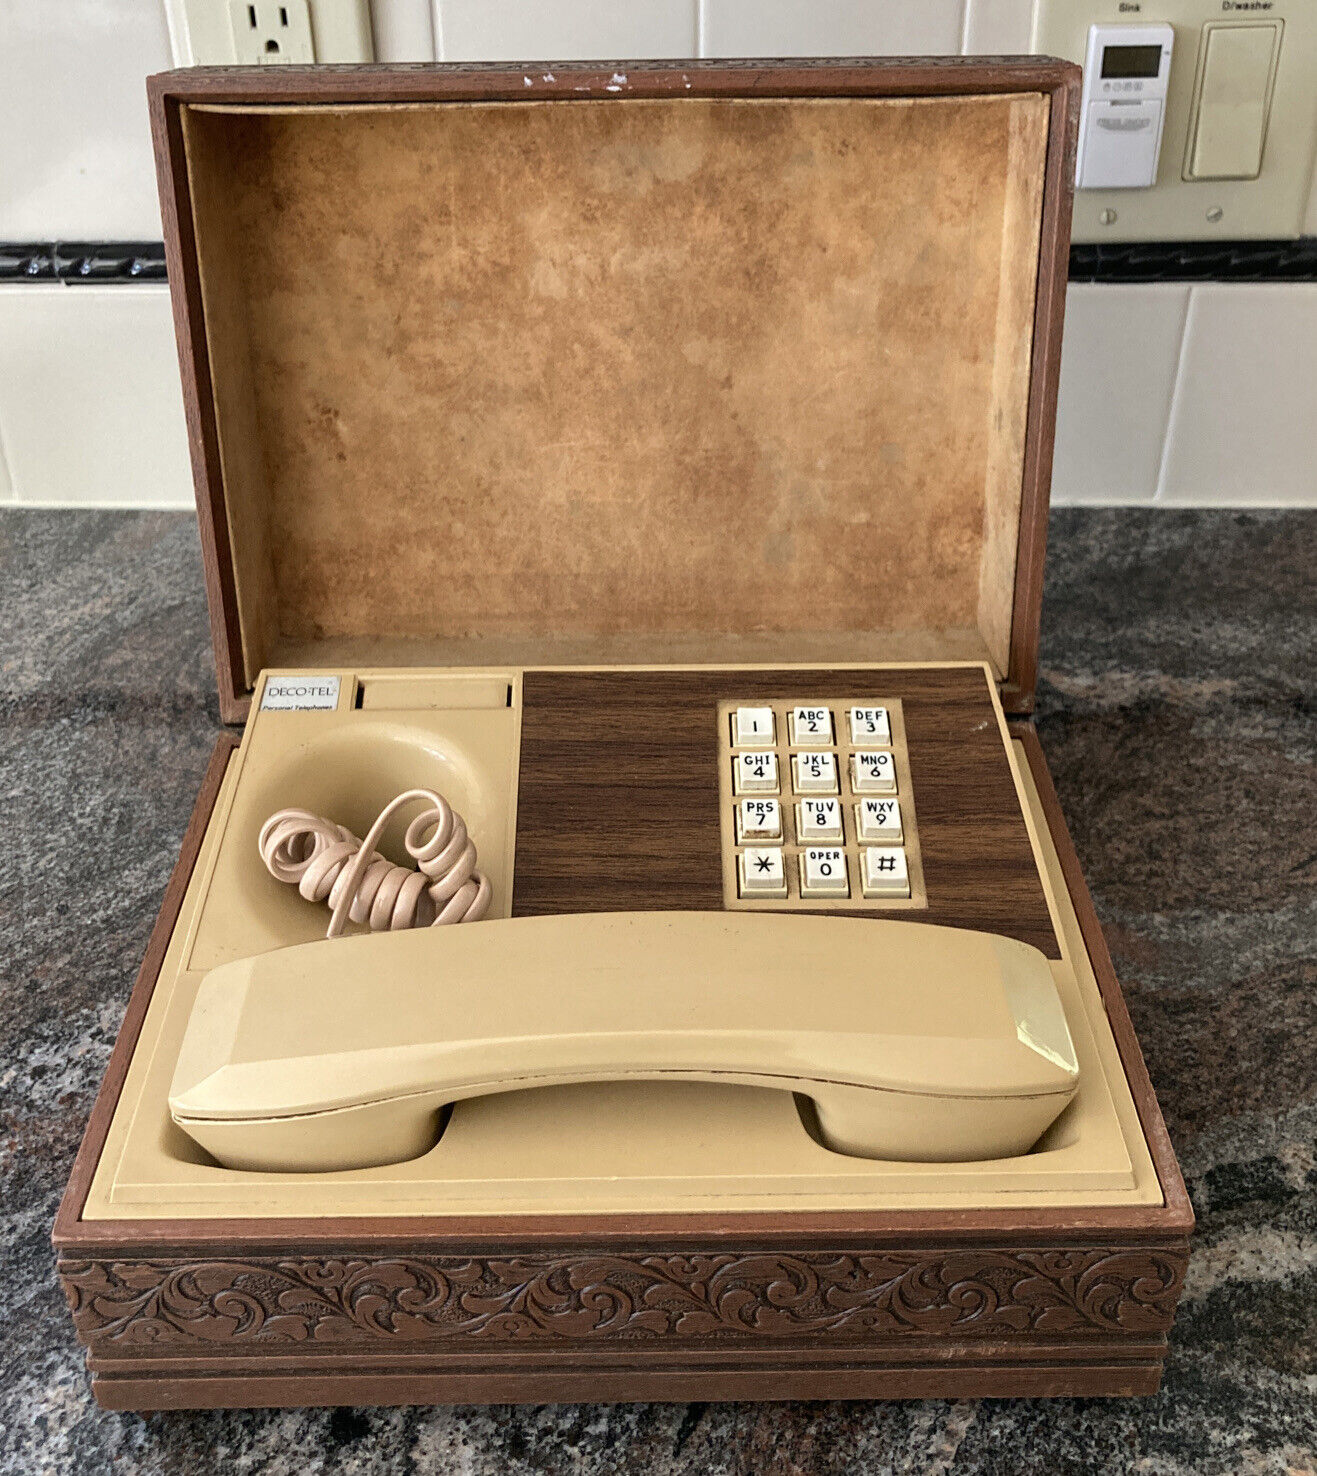 Vintage Deco-Tel Personal Telephone Executive Phone in a Box Touchtone Push Butt